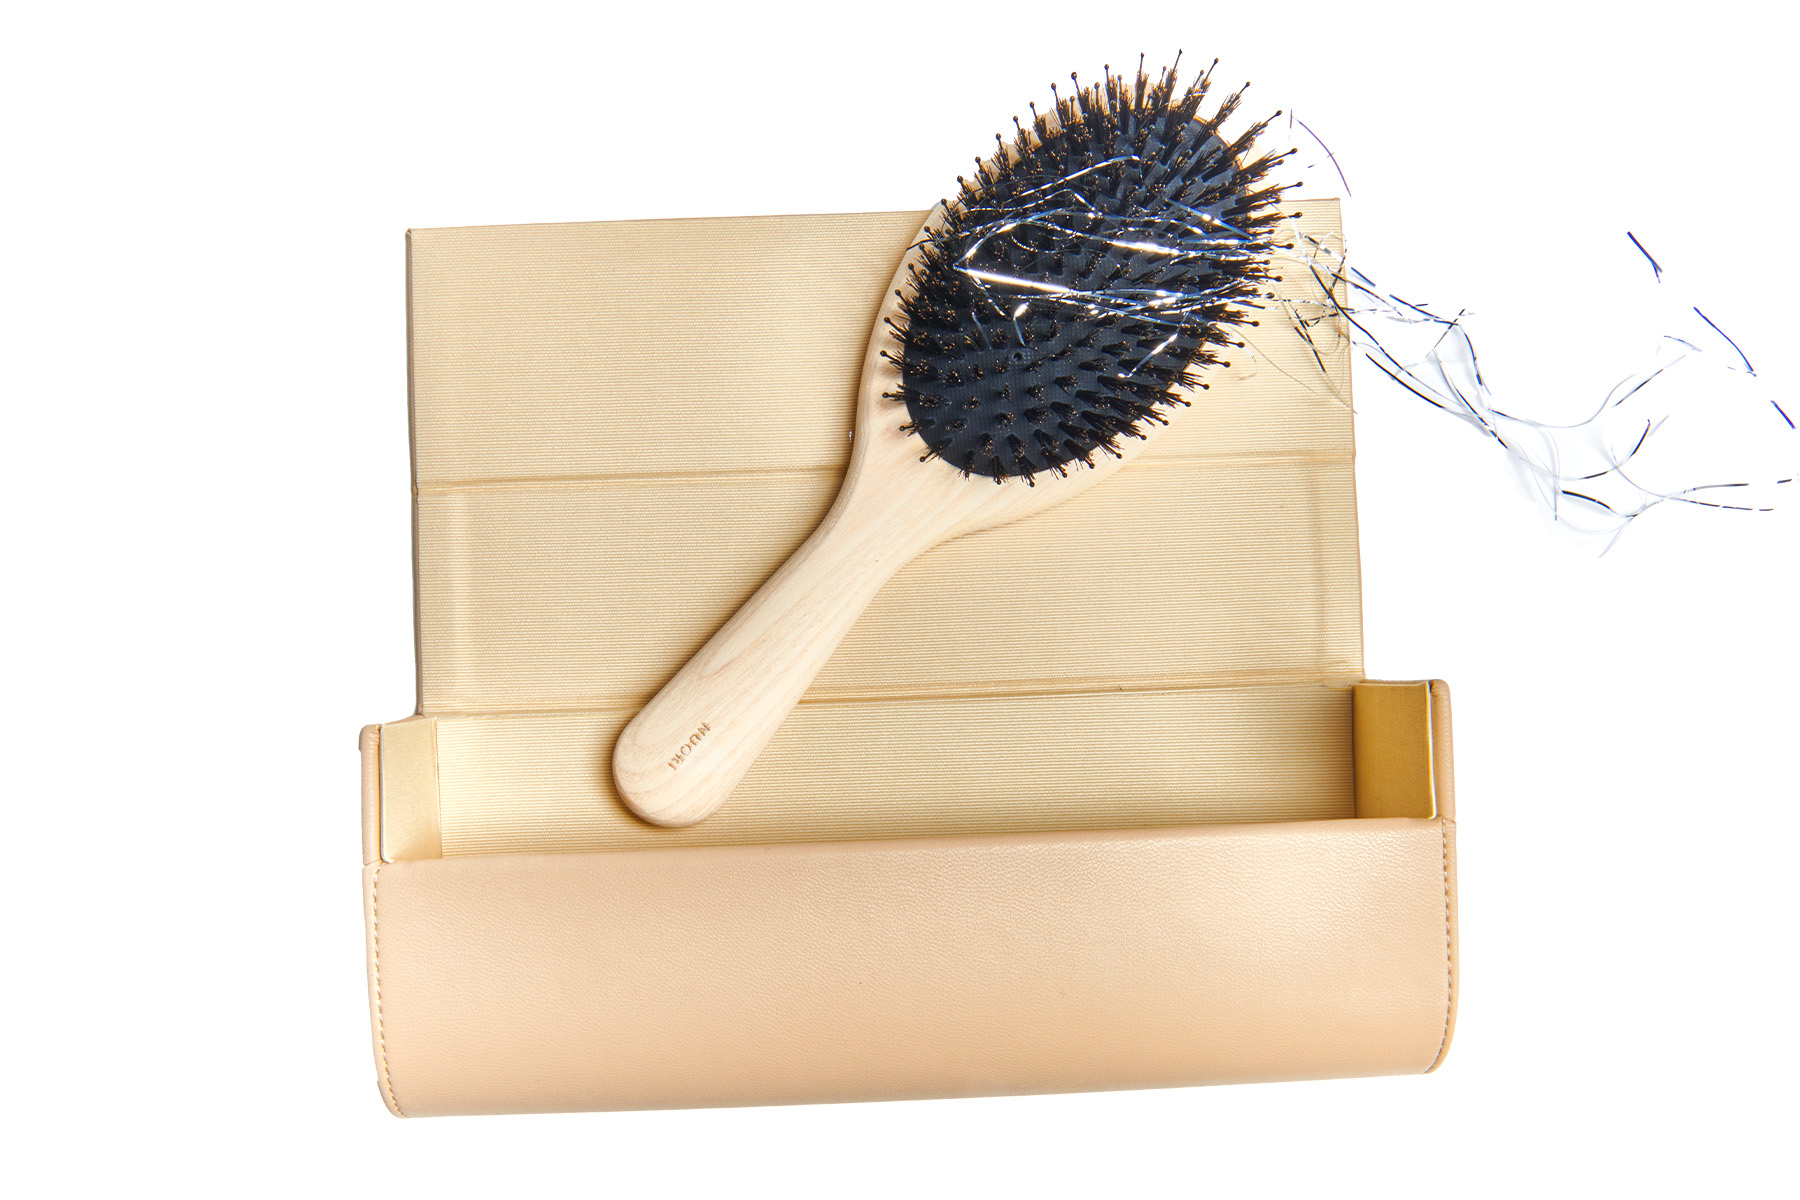 Nouri Hair Brush from The Conservatory